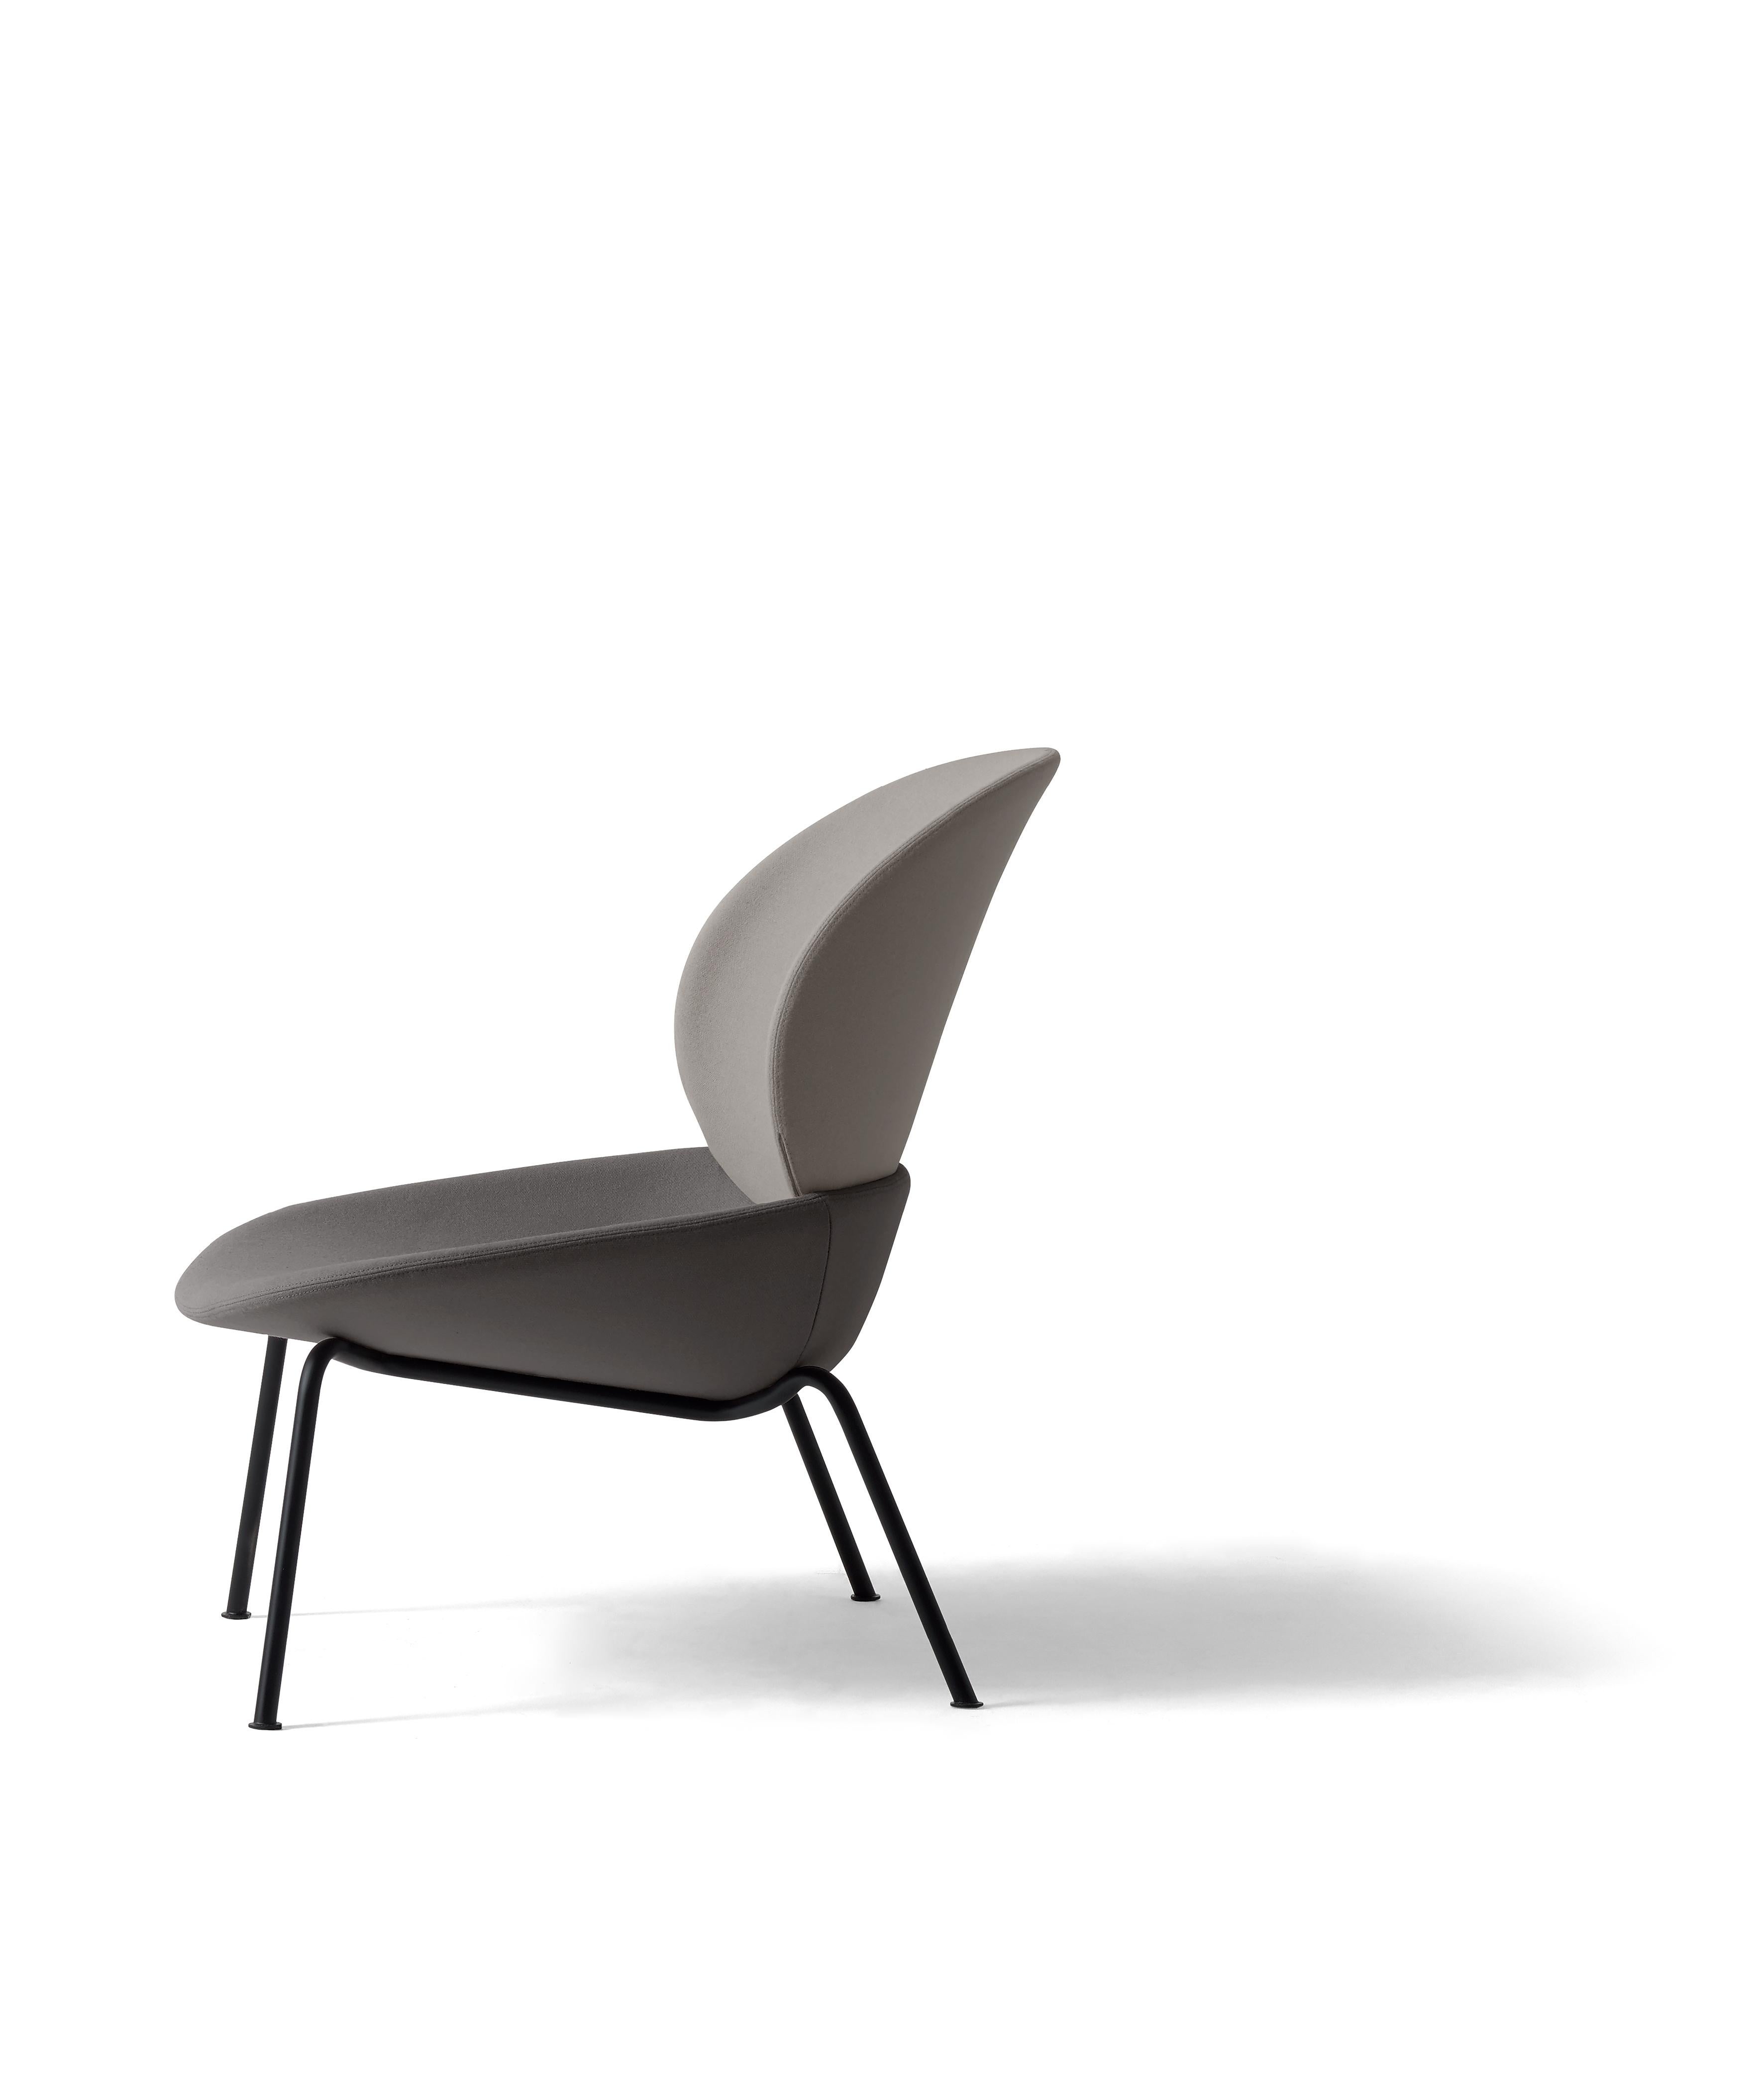 Tellin armchair has the elegant appearance of a welcoming open seashell. Two “valves” meet and merge by overlapping so to compose the seat and the backrest.

Additional information:
Materials: Upholstered seat and backrest with black lacquered